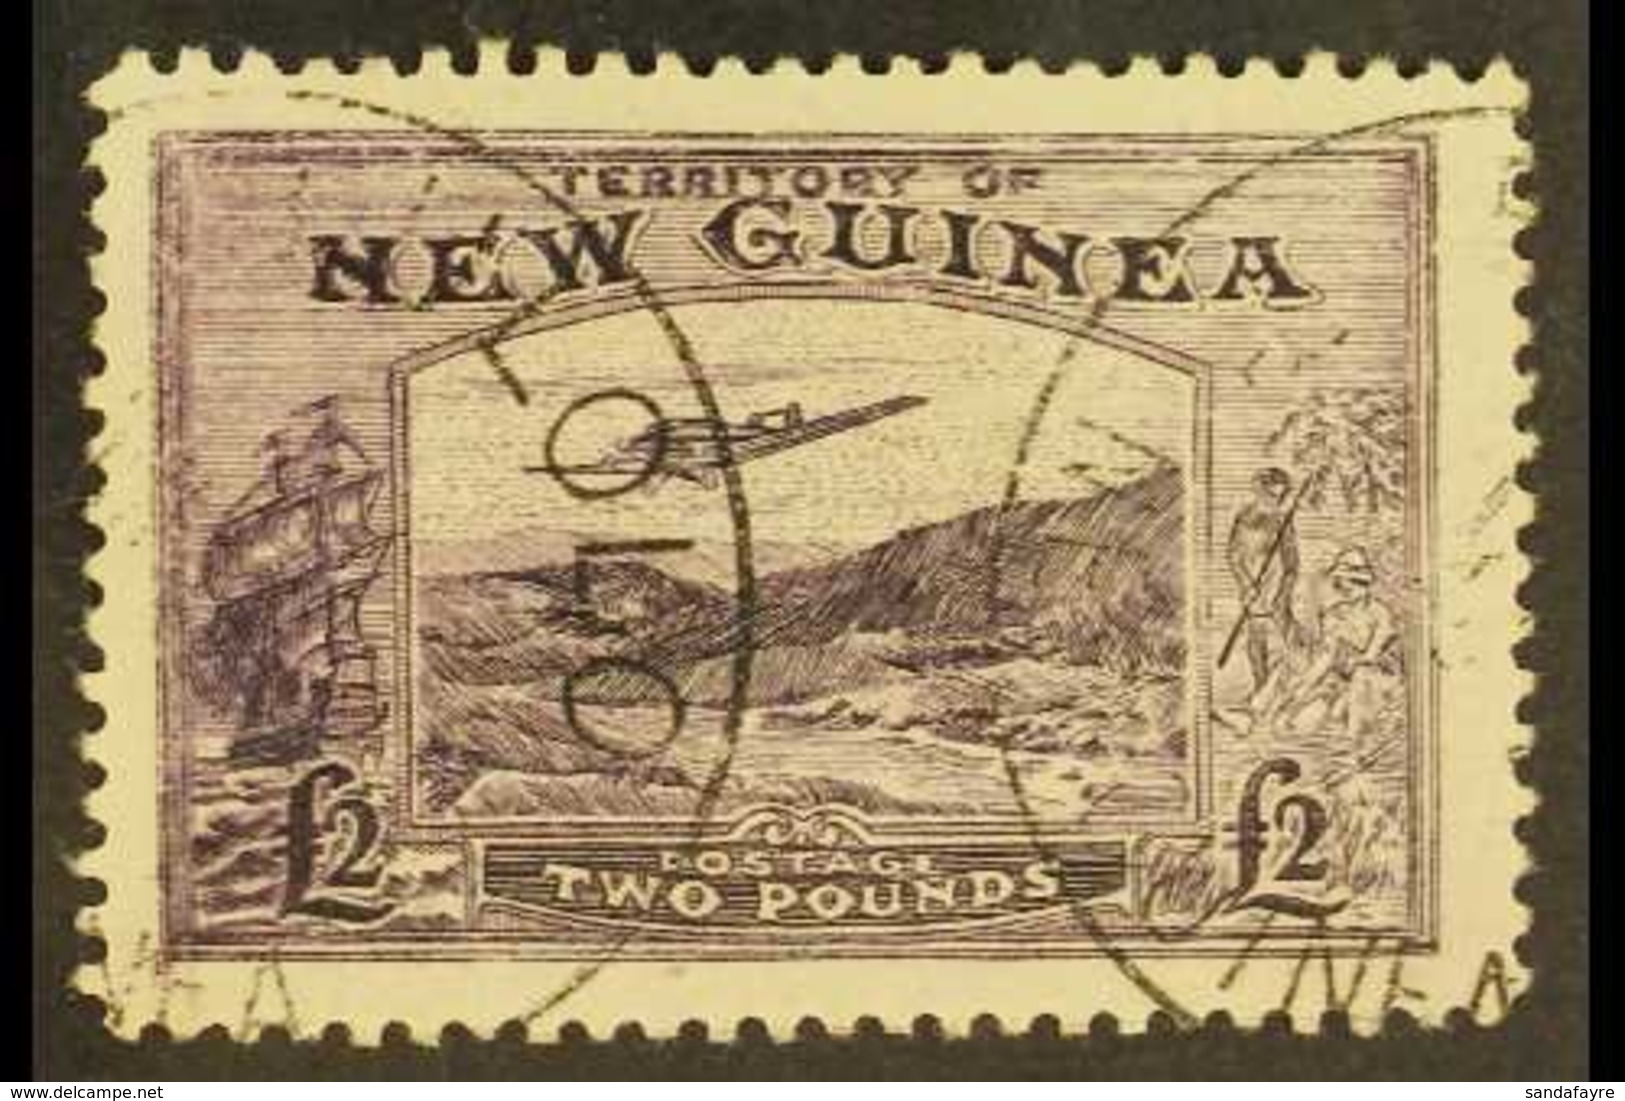 1935 A Seldom Seen £2 Bright Violet Shade (as SG 204) "Bulolo Goldfields" Air Postage FORGERY Attributed To Panelli With - Papúa Nueva Guinea